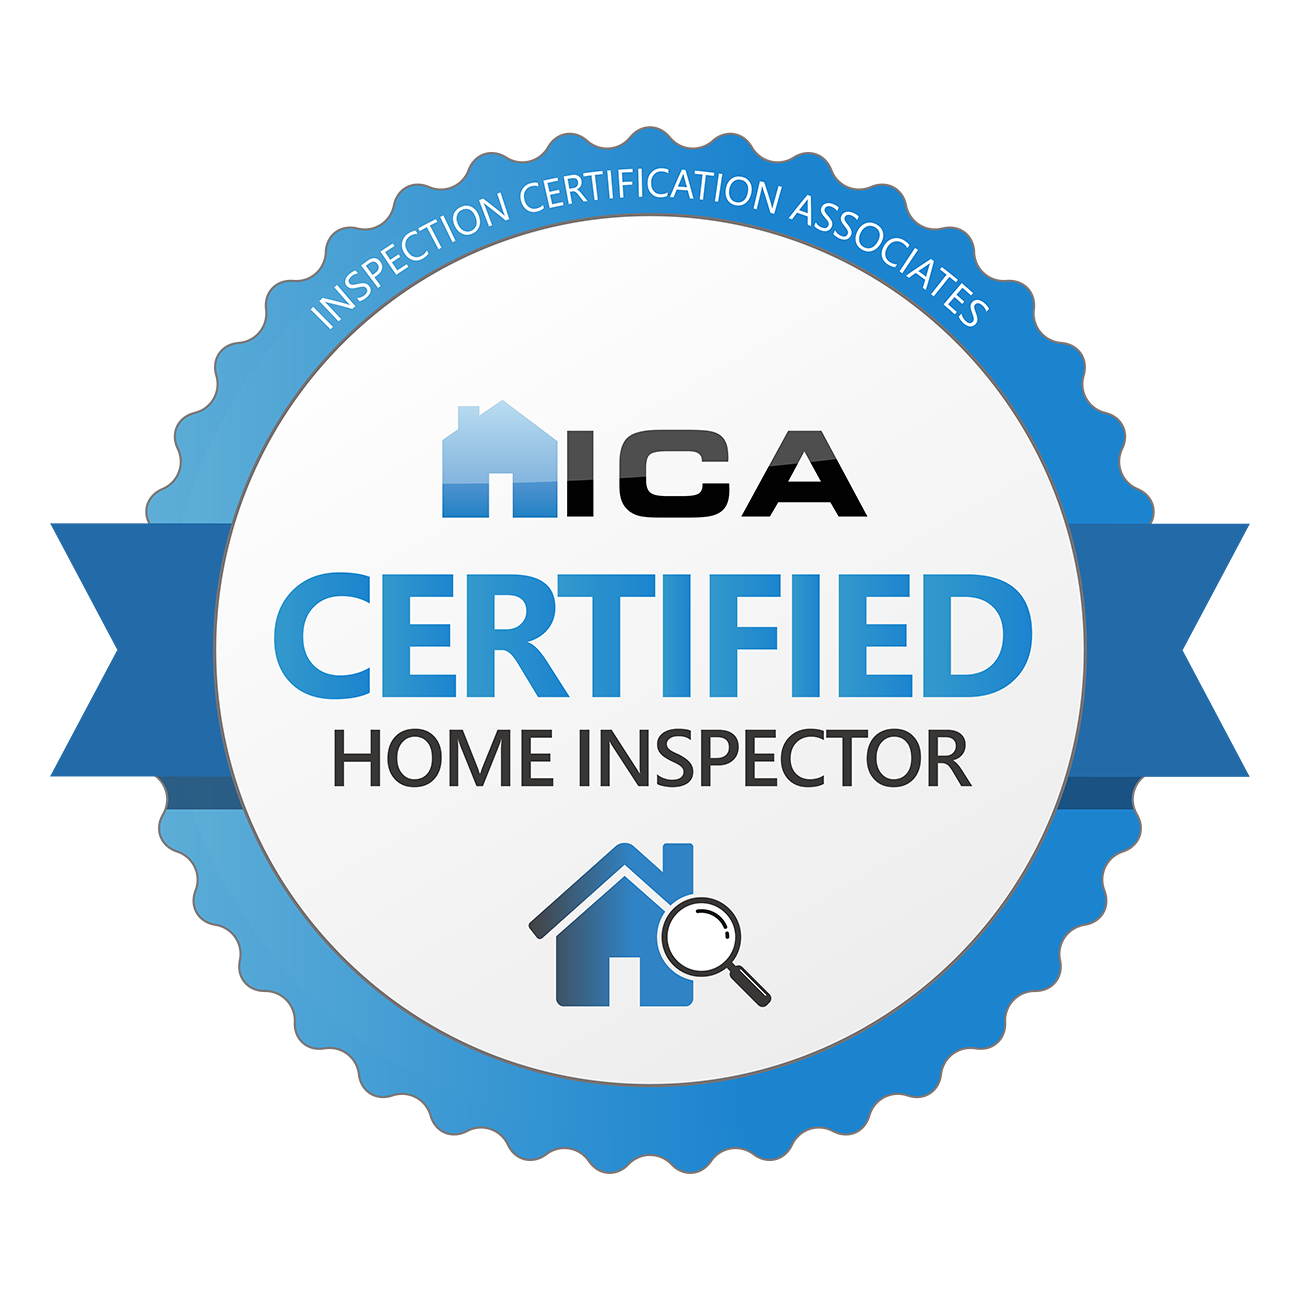 Honorable Home Inspection Tn